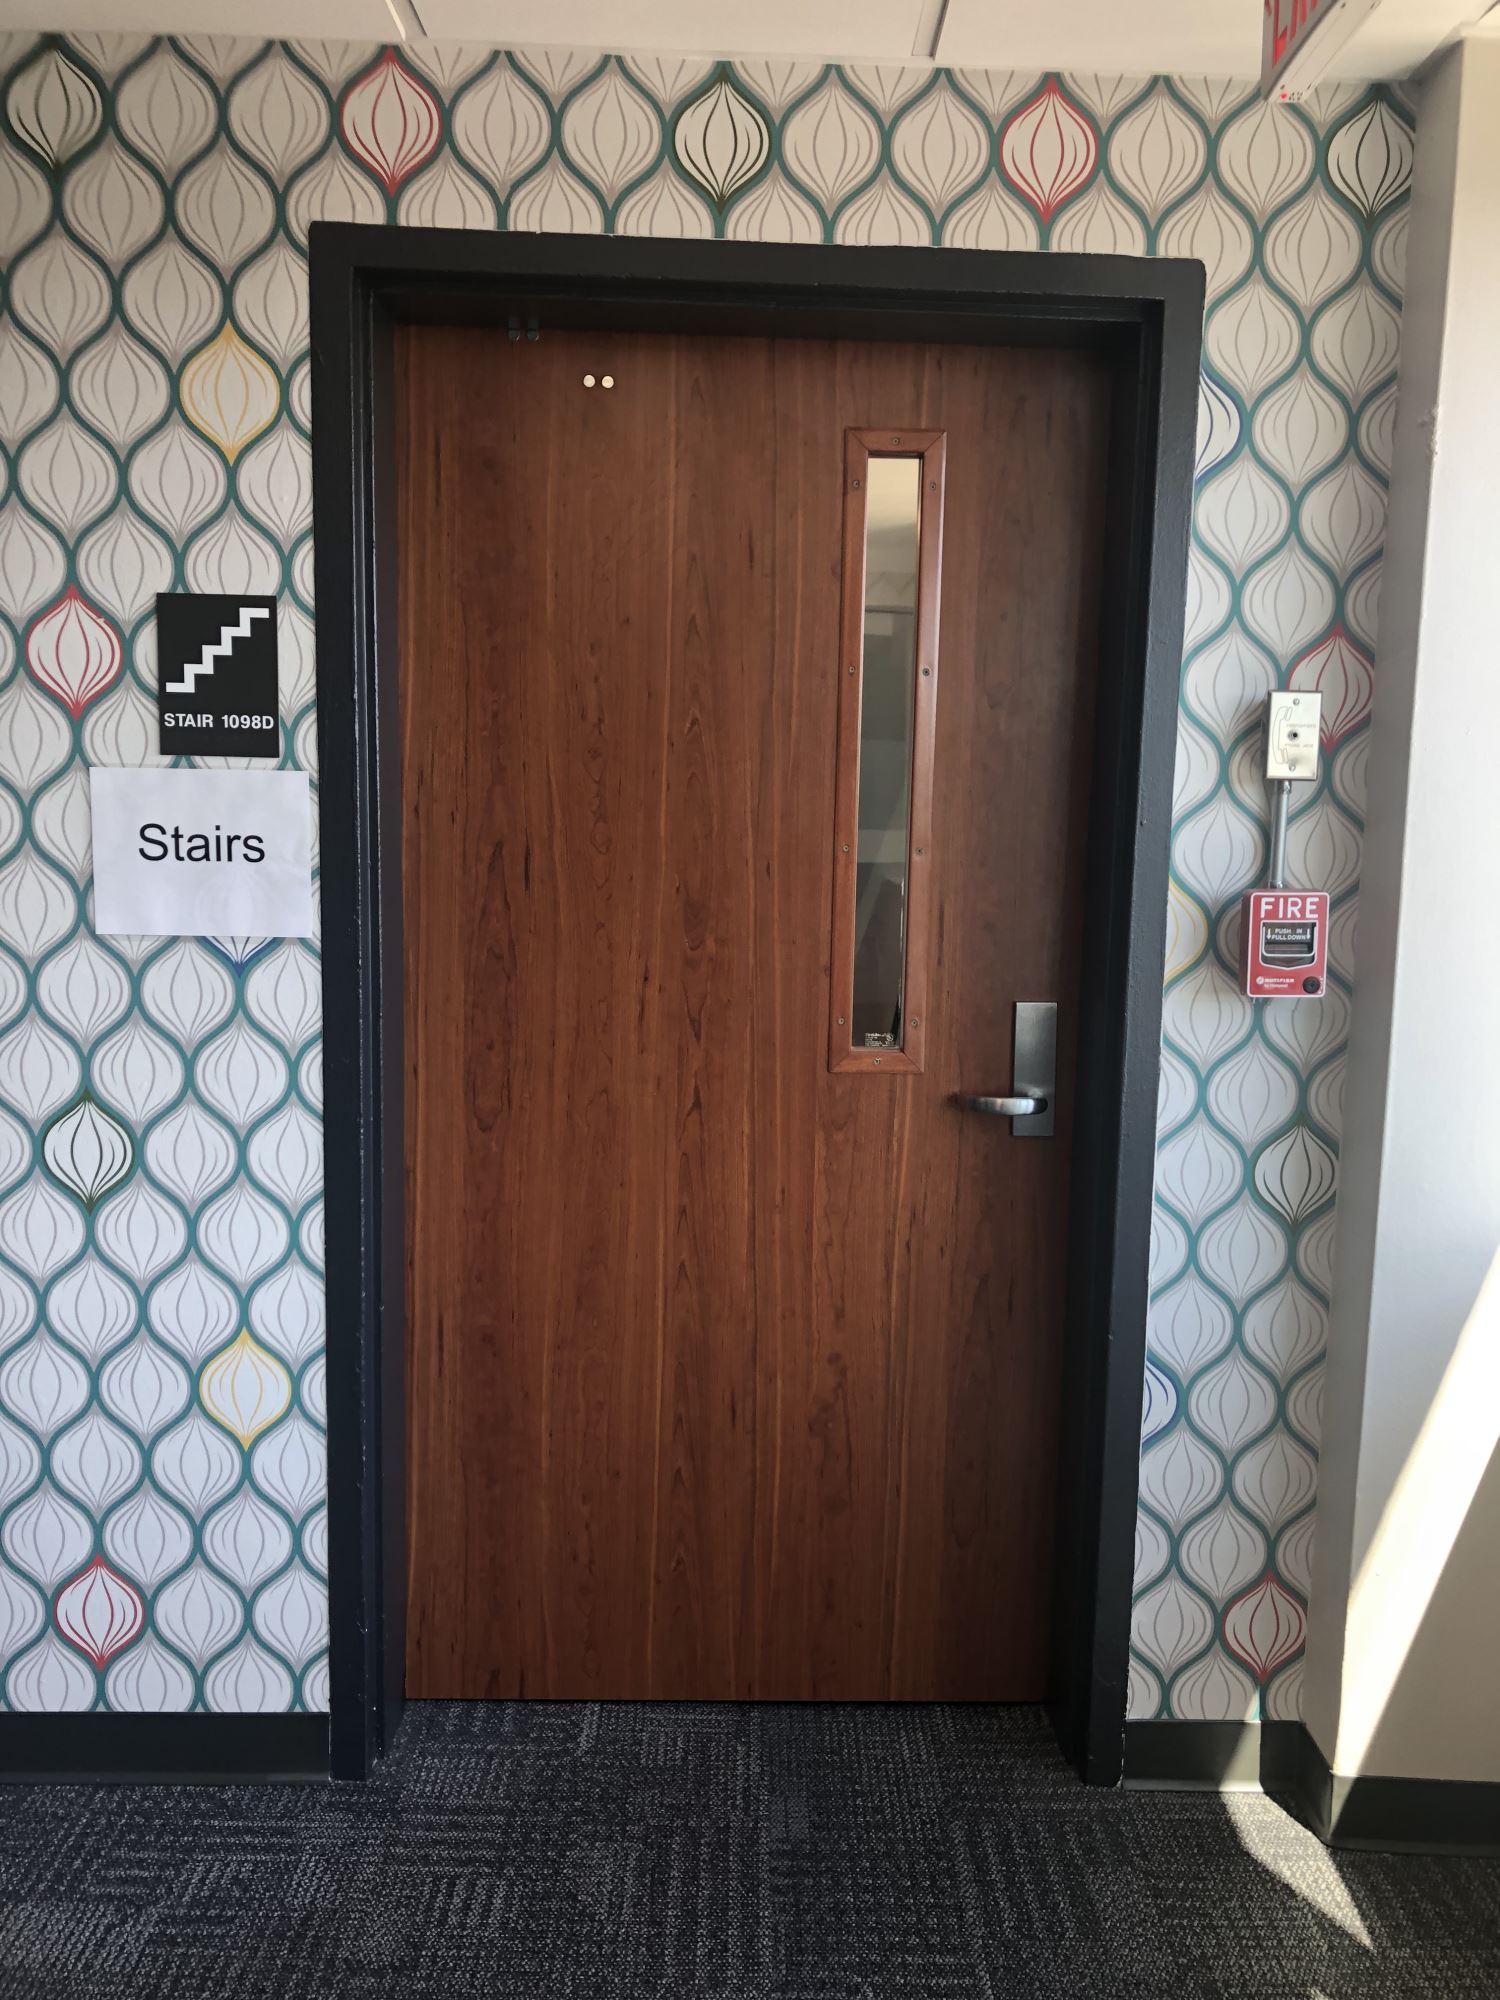 VT's flush door clad in Formica's Glamour Cherry laminate.